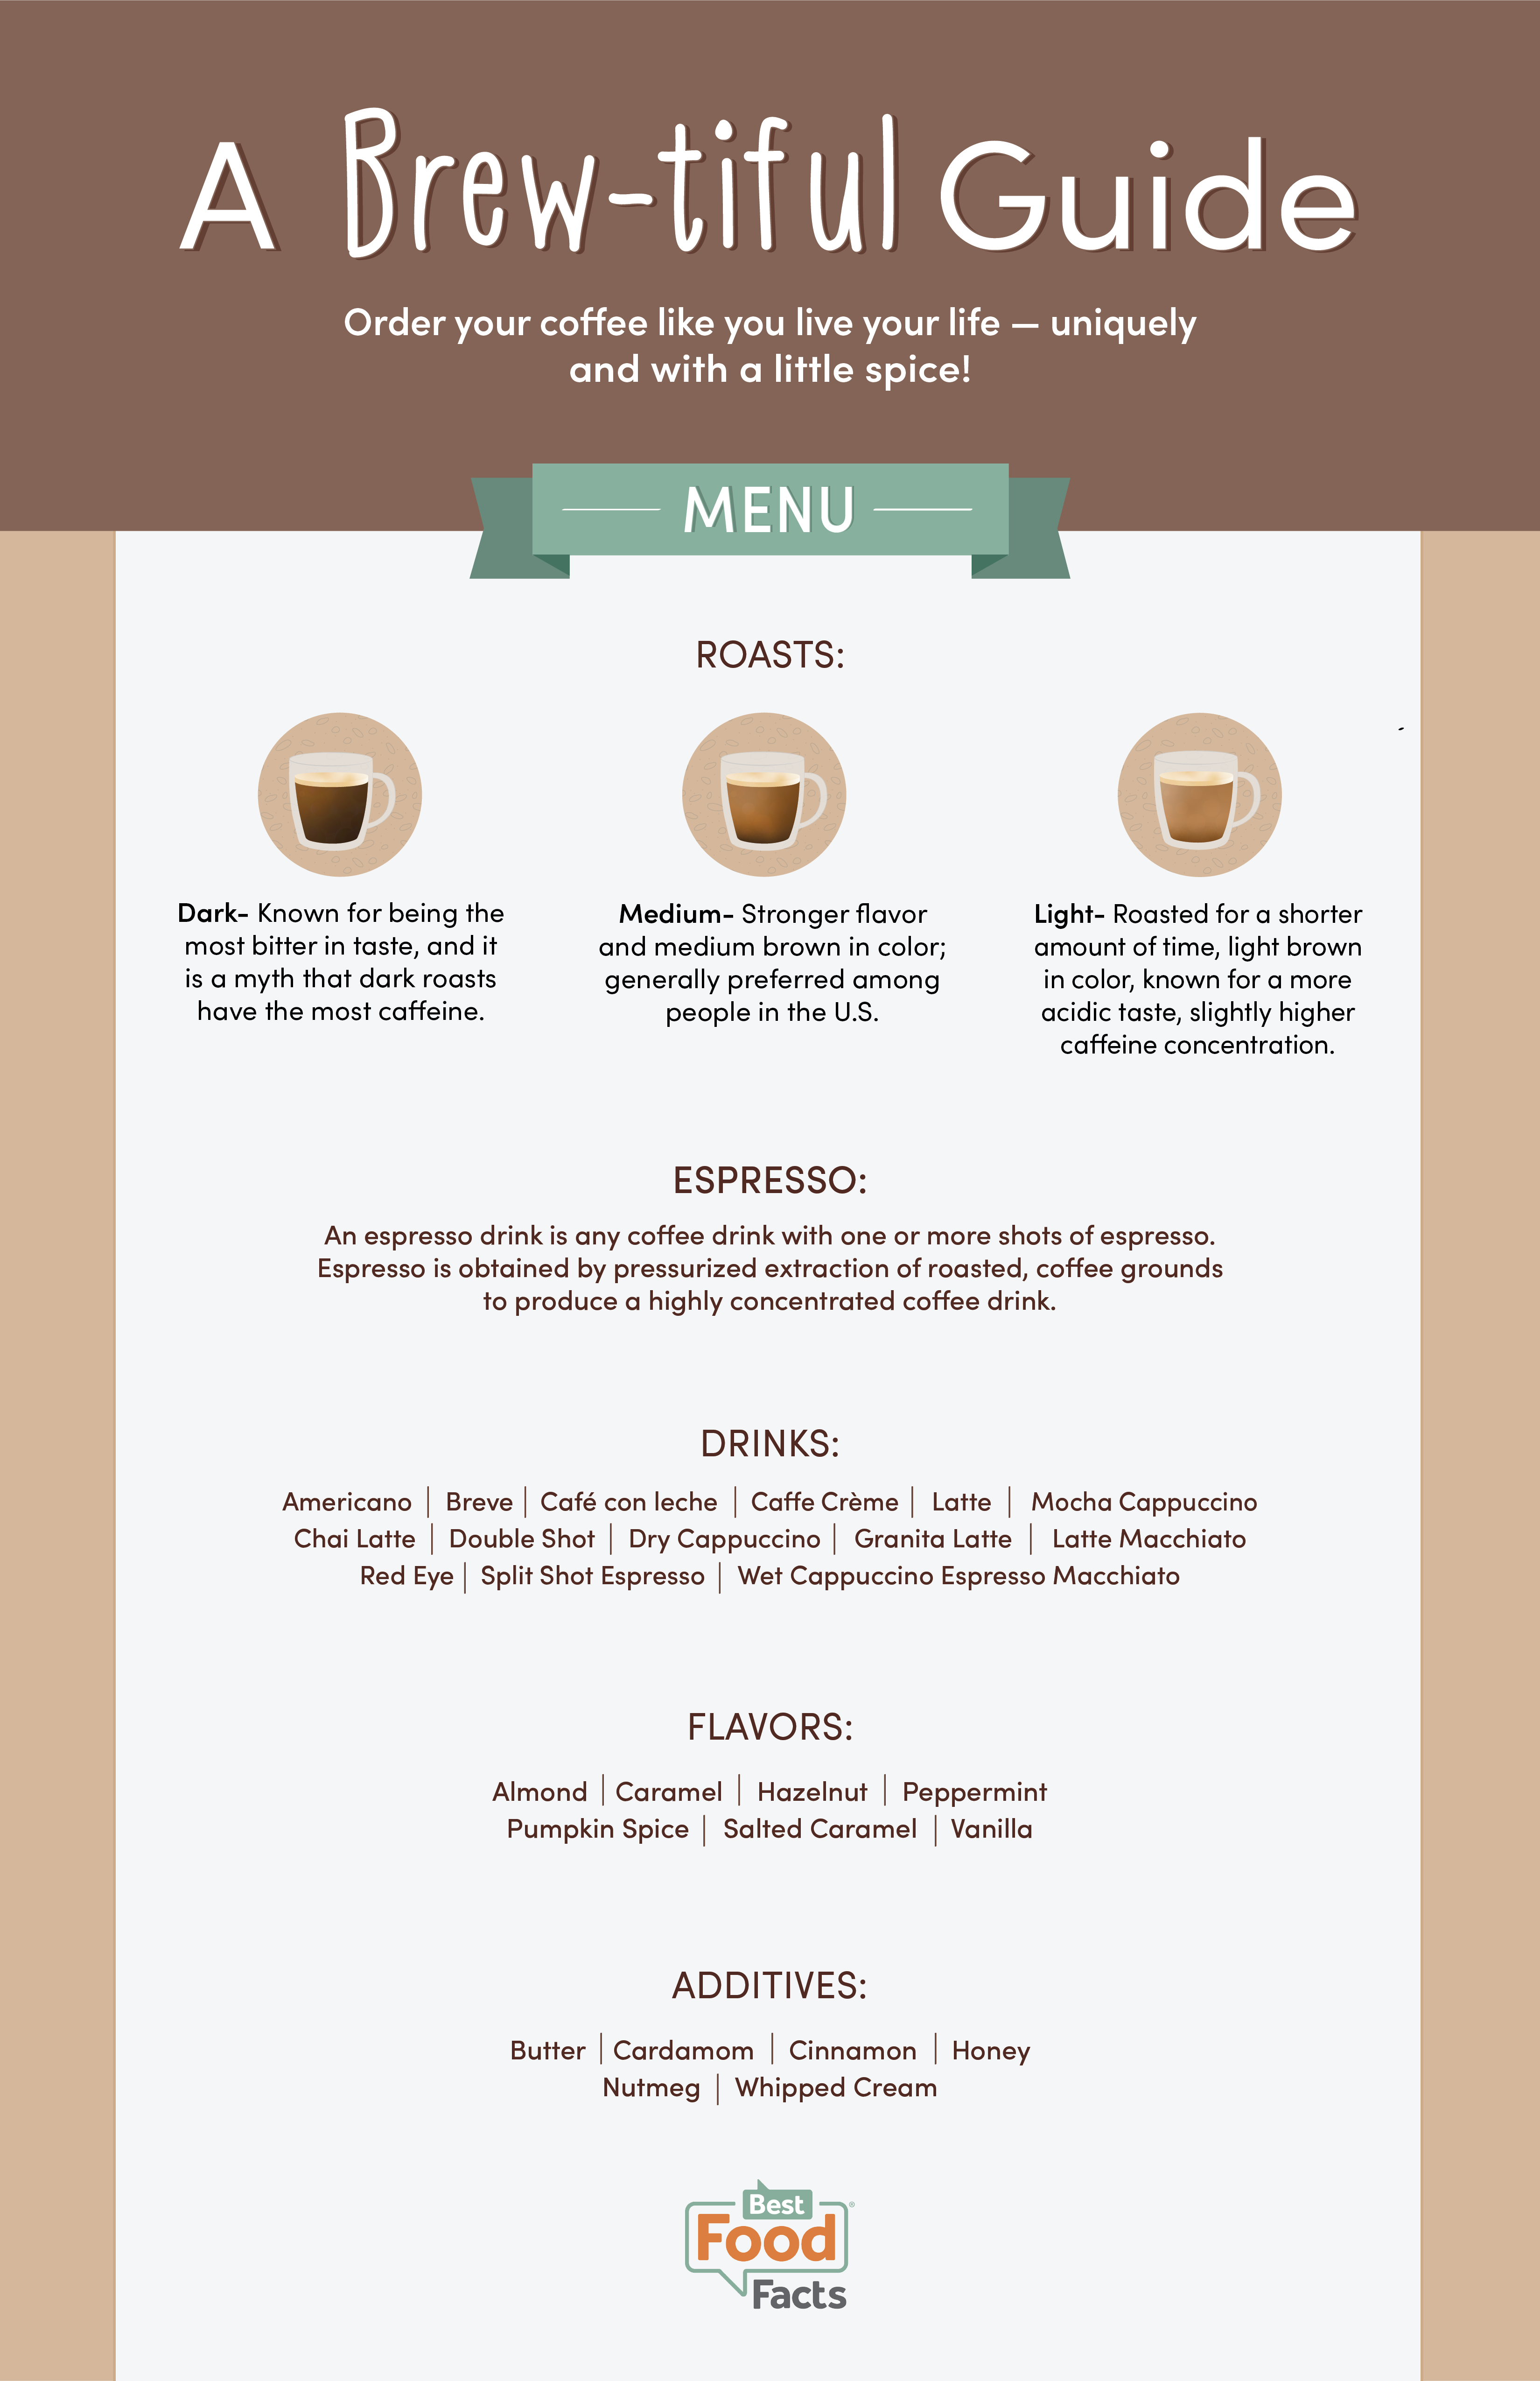 Coffee Guide: Nutrition, Benefits, Side Effects, More